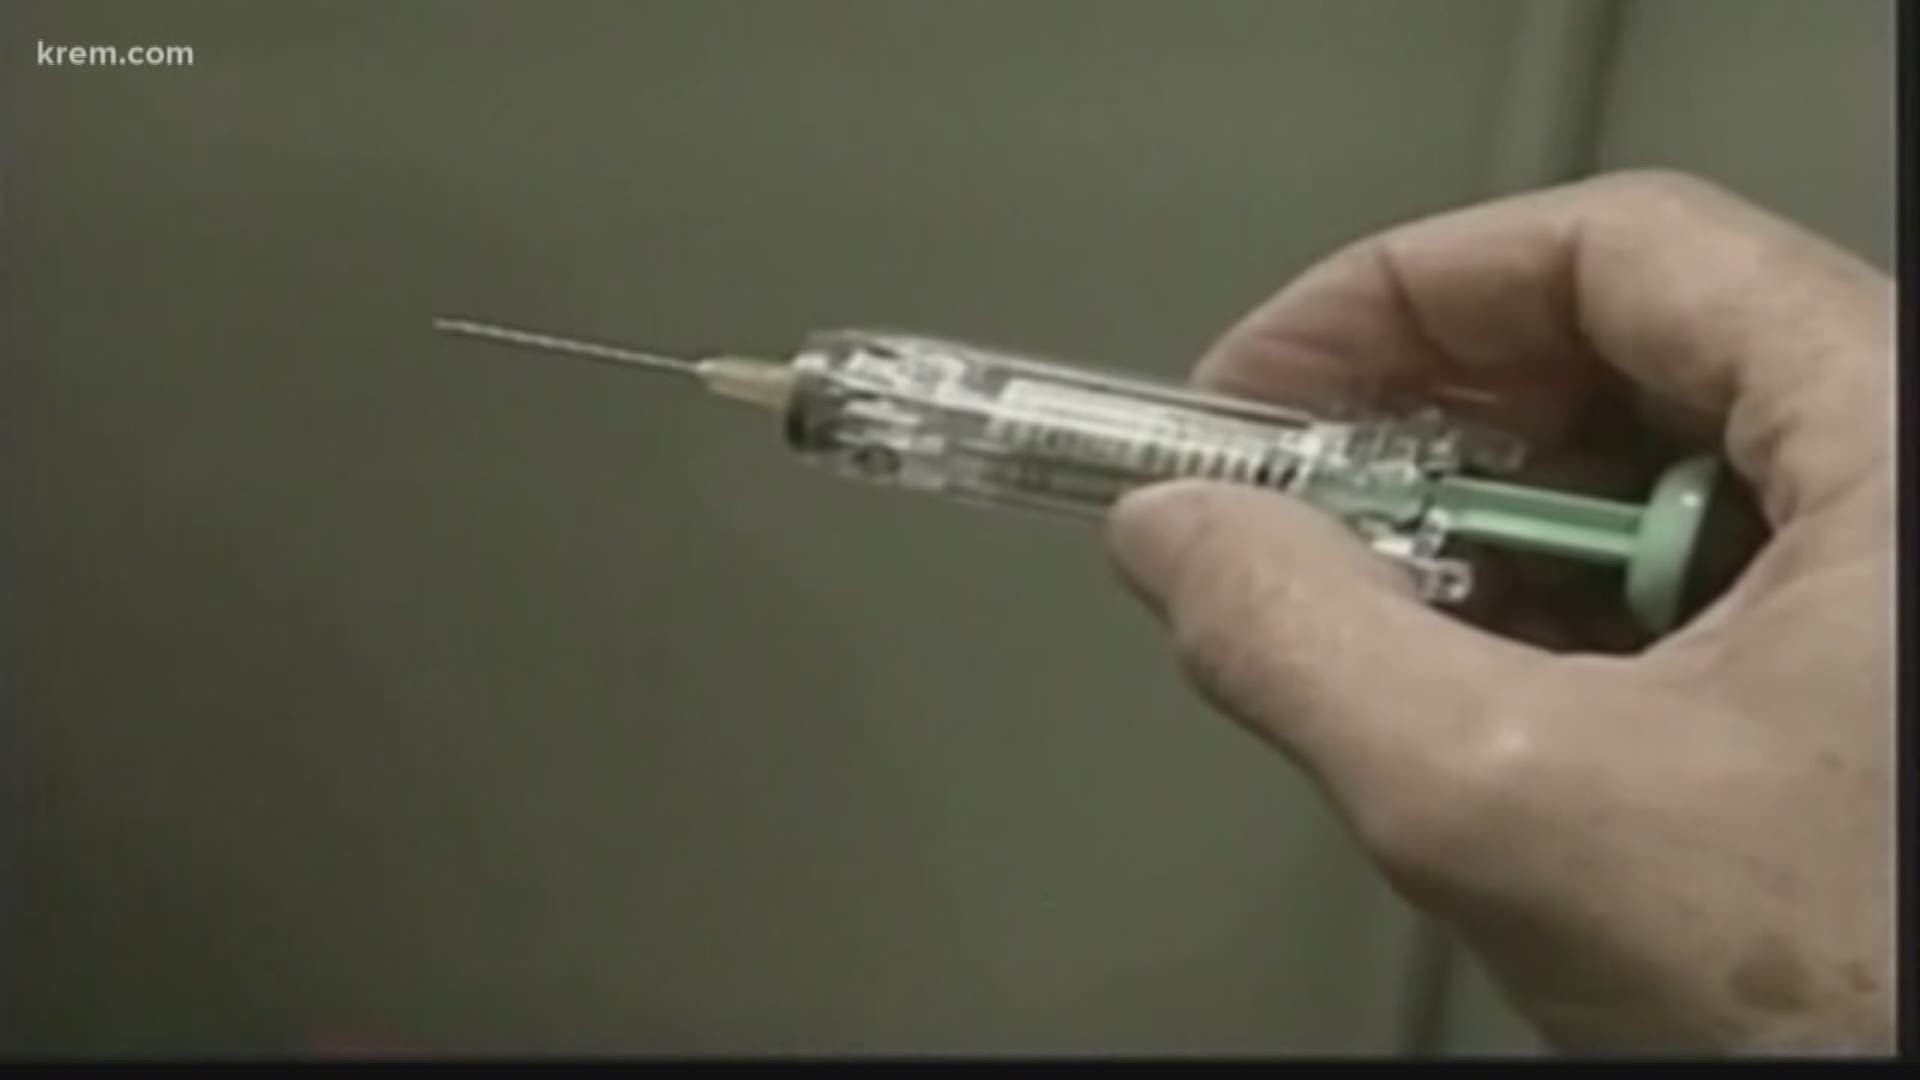 The measles outbreak Washington state has now climbed to 48 confirmed cases. Most of the patients are unvaccinated children, re-igniting the conversation about the importance of vaccinations.